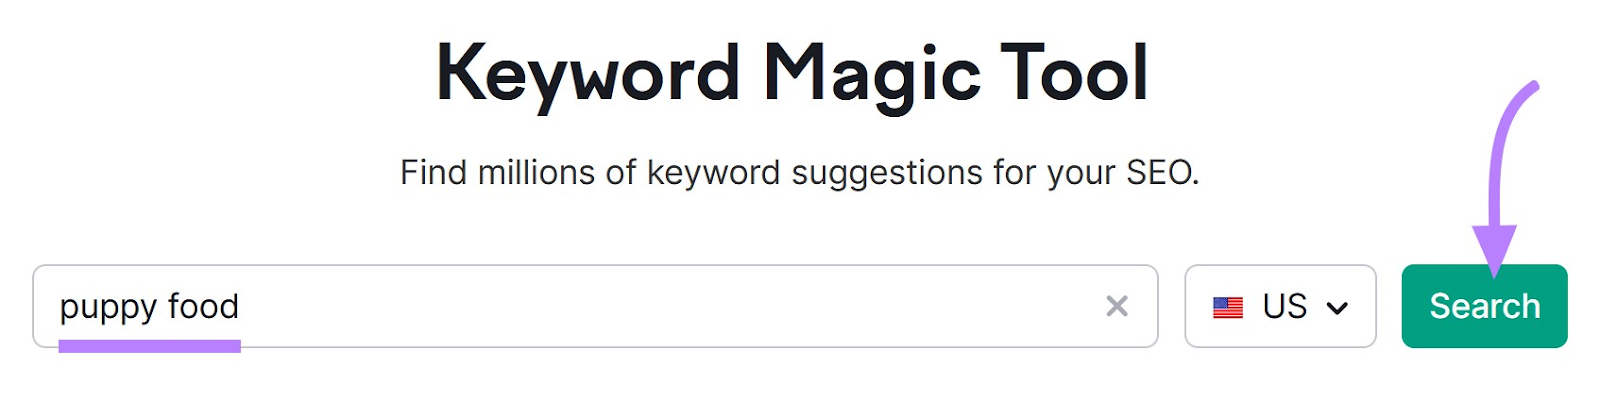 search for “puppy food” in Keyword Magic Tool